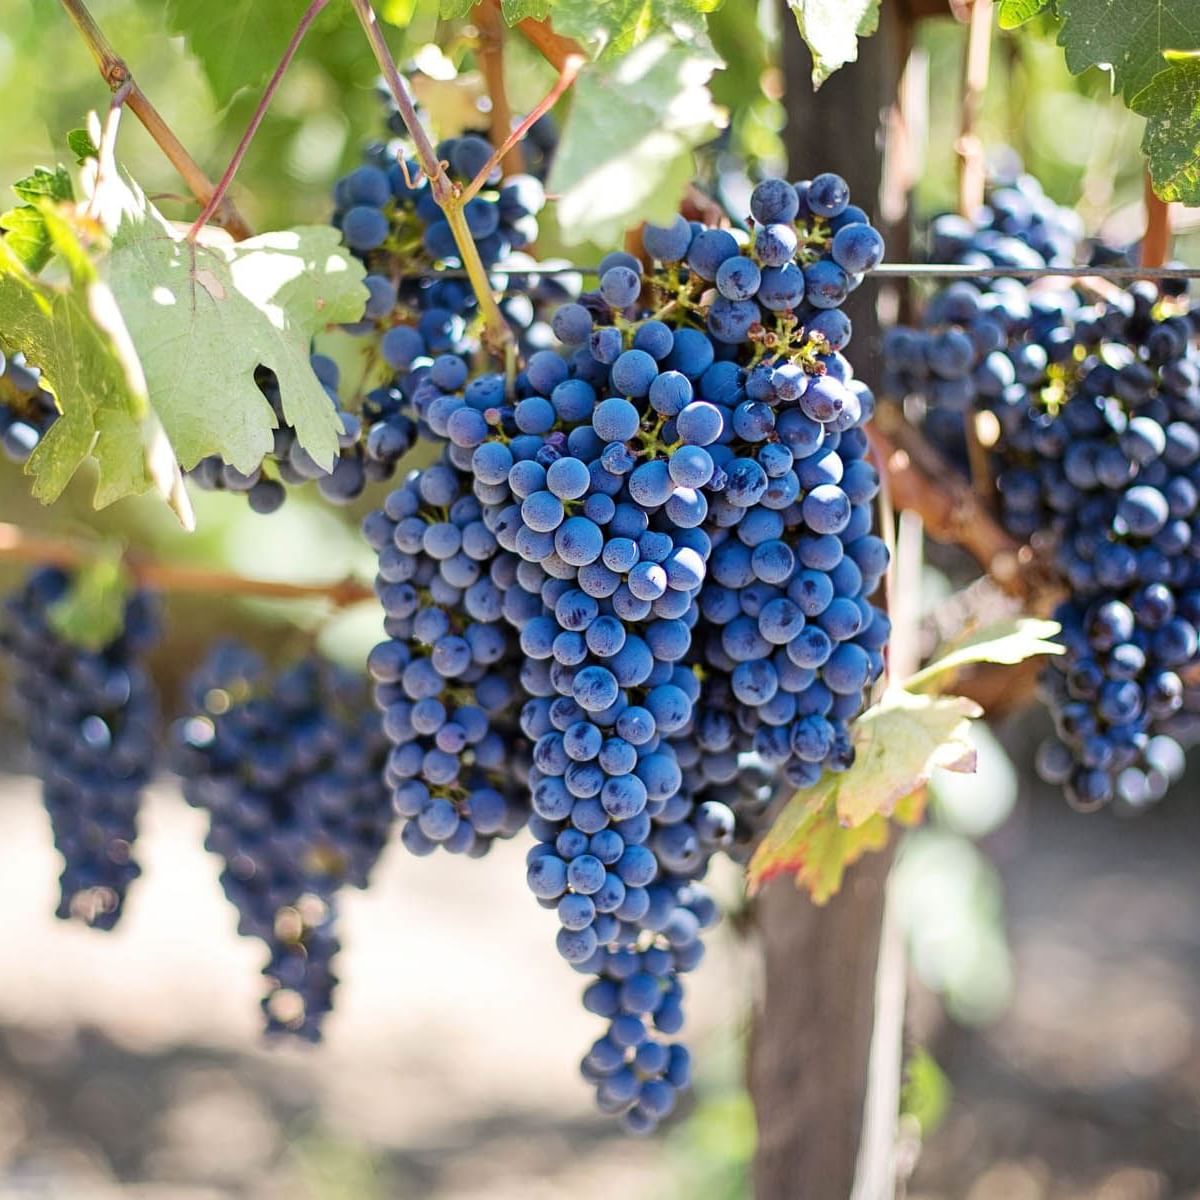 Closeup on grapes on vines in a vineyard near Originals Hotels